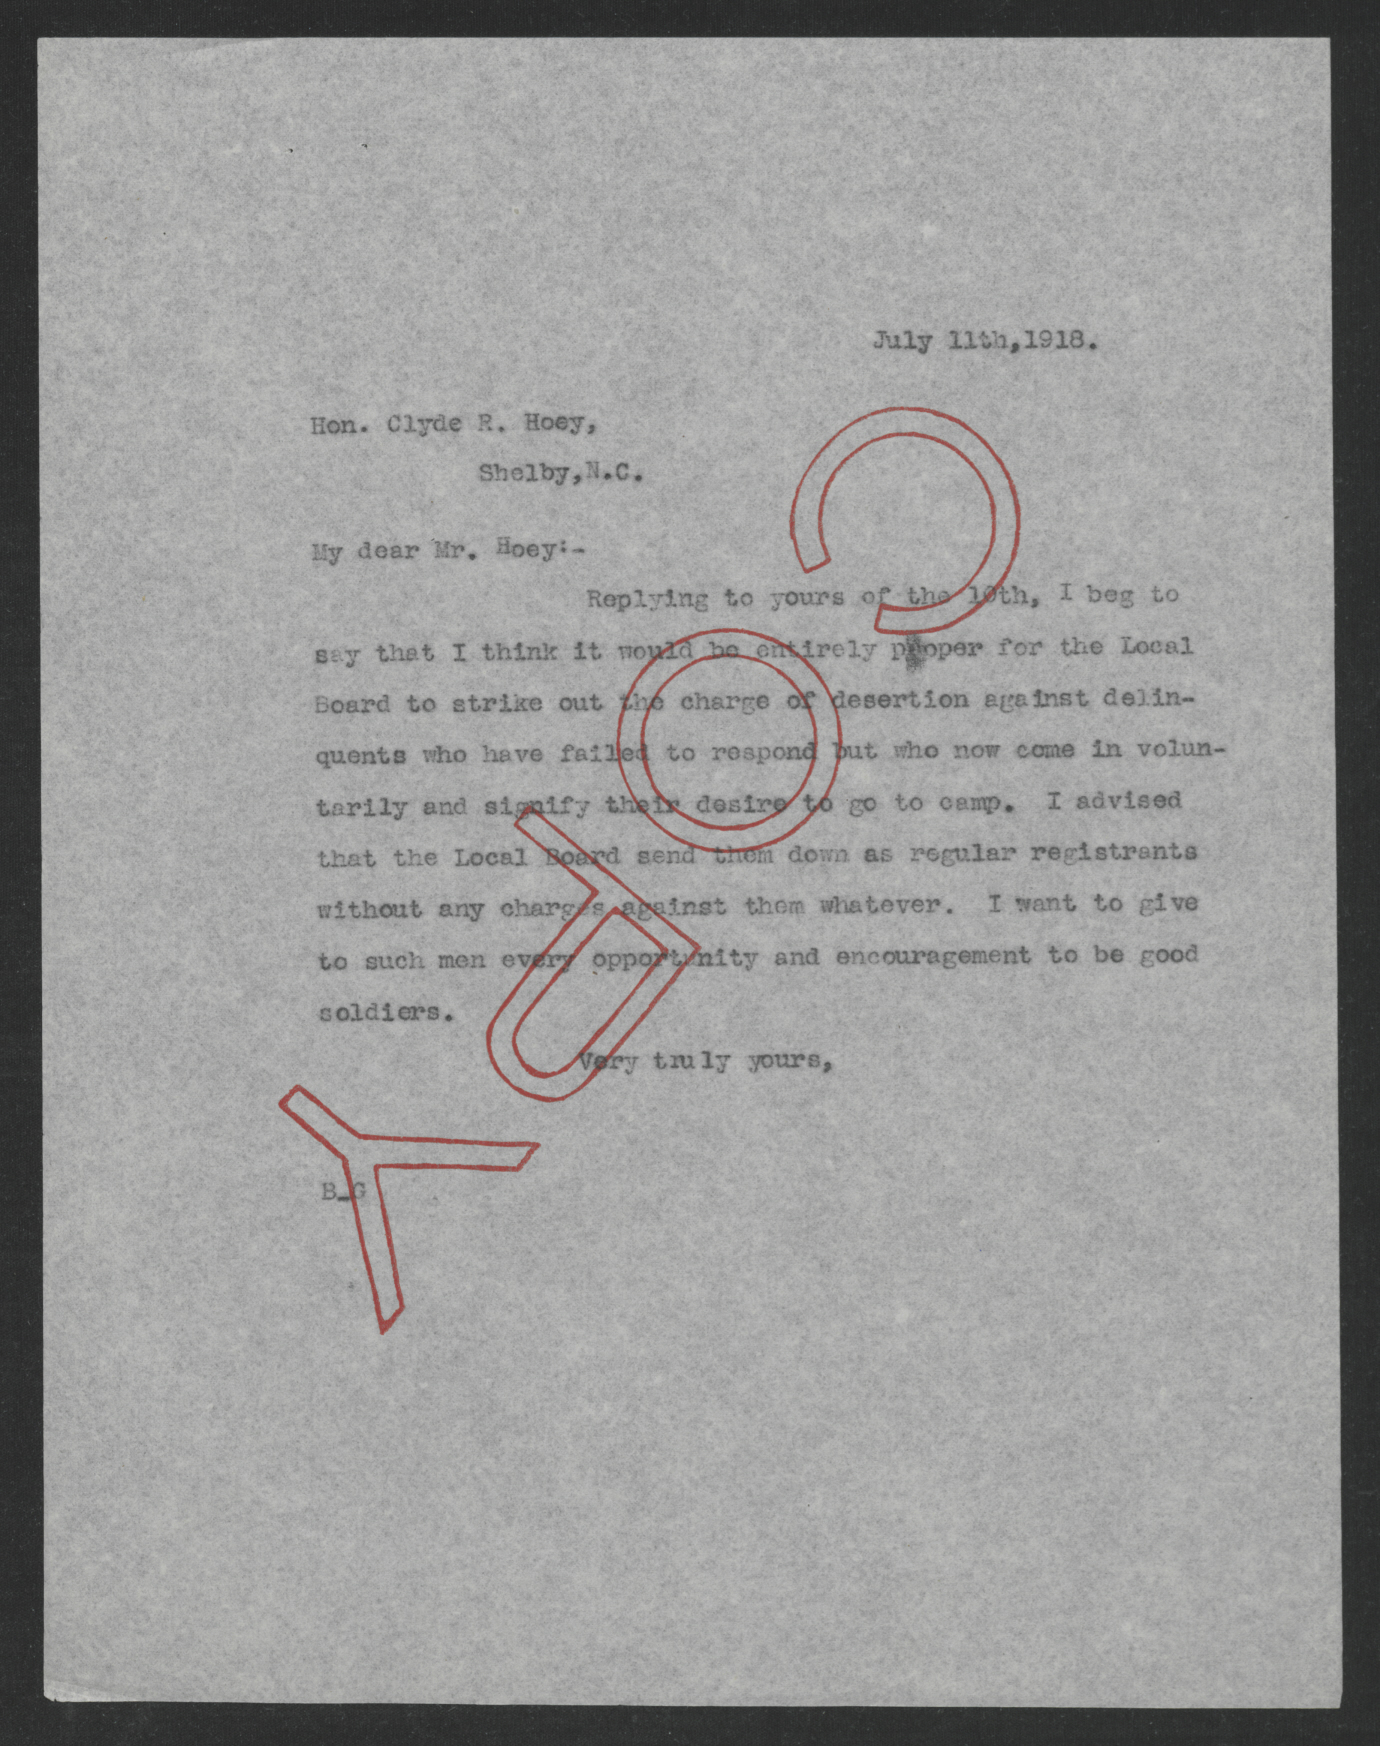 Letter from Thomas W. Bickett to Clyde R. Hoey, July 11, 1918